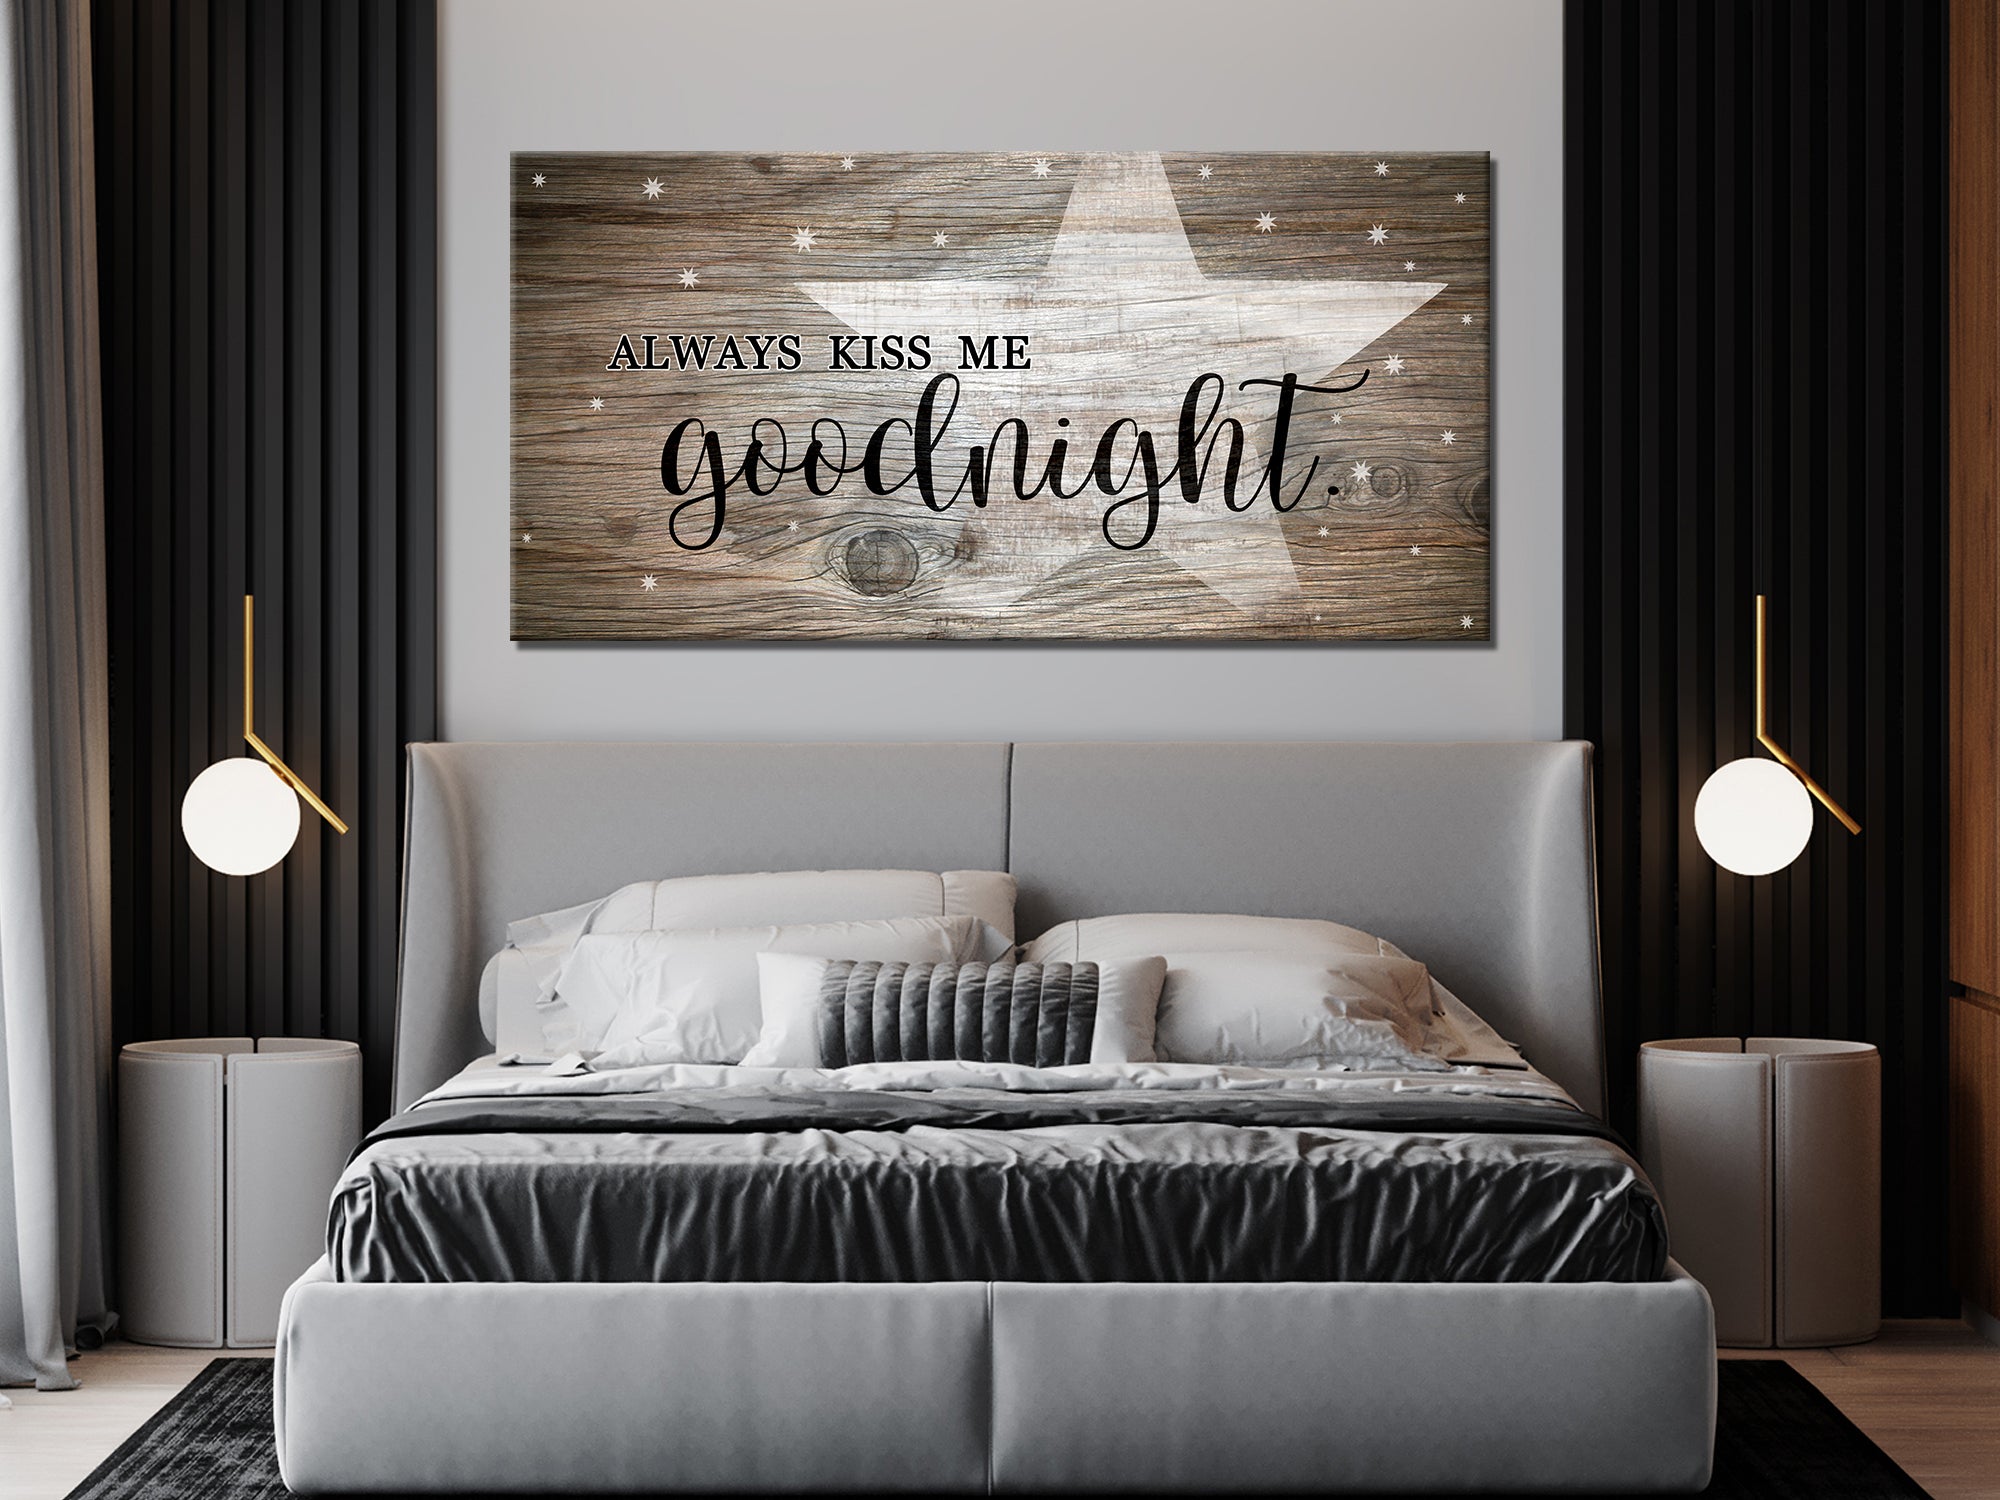 Always Kiss me at Goodnight - Bedroom Canvas Wall Art